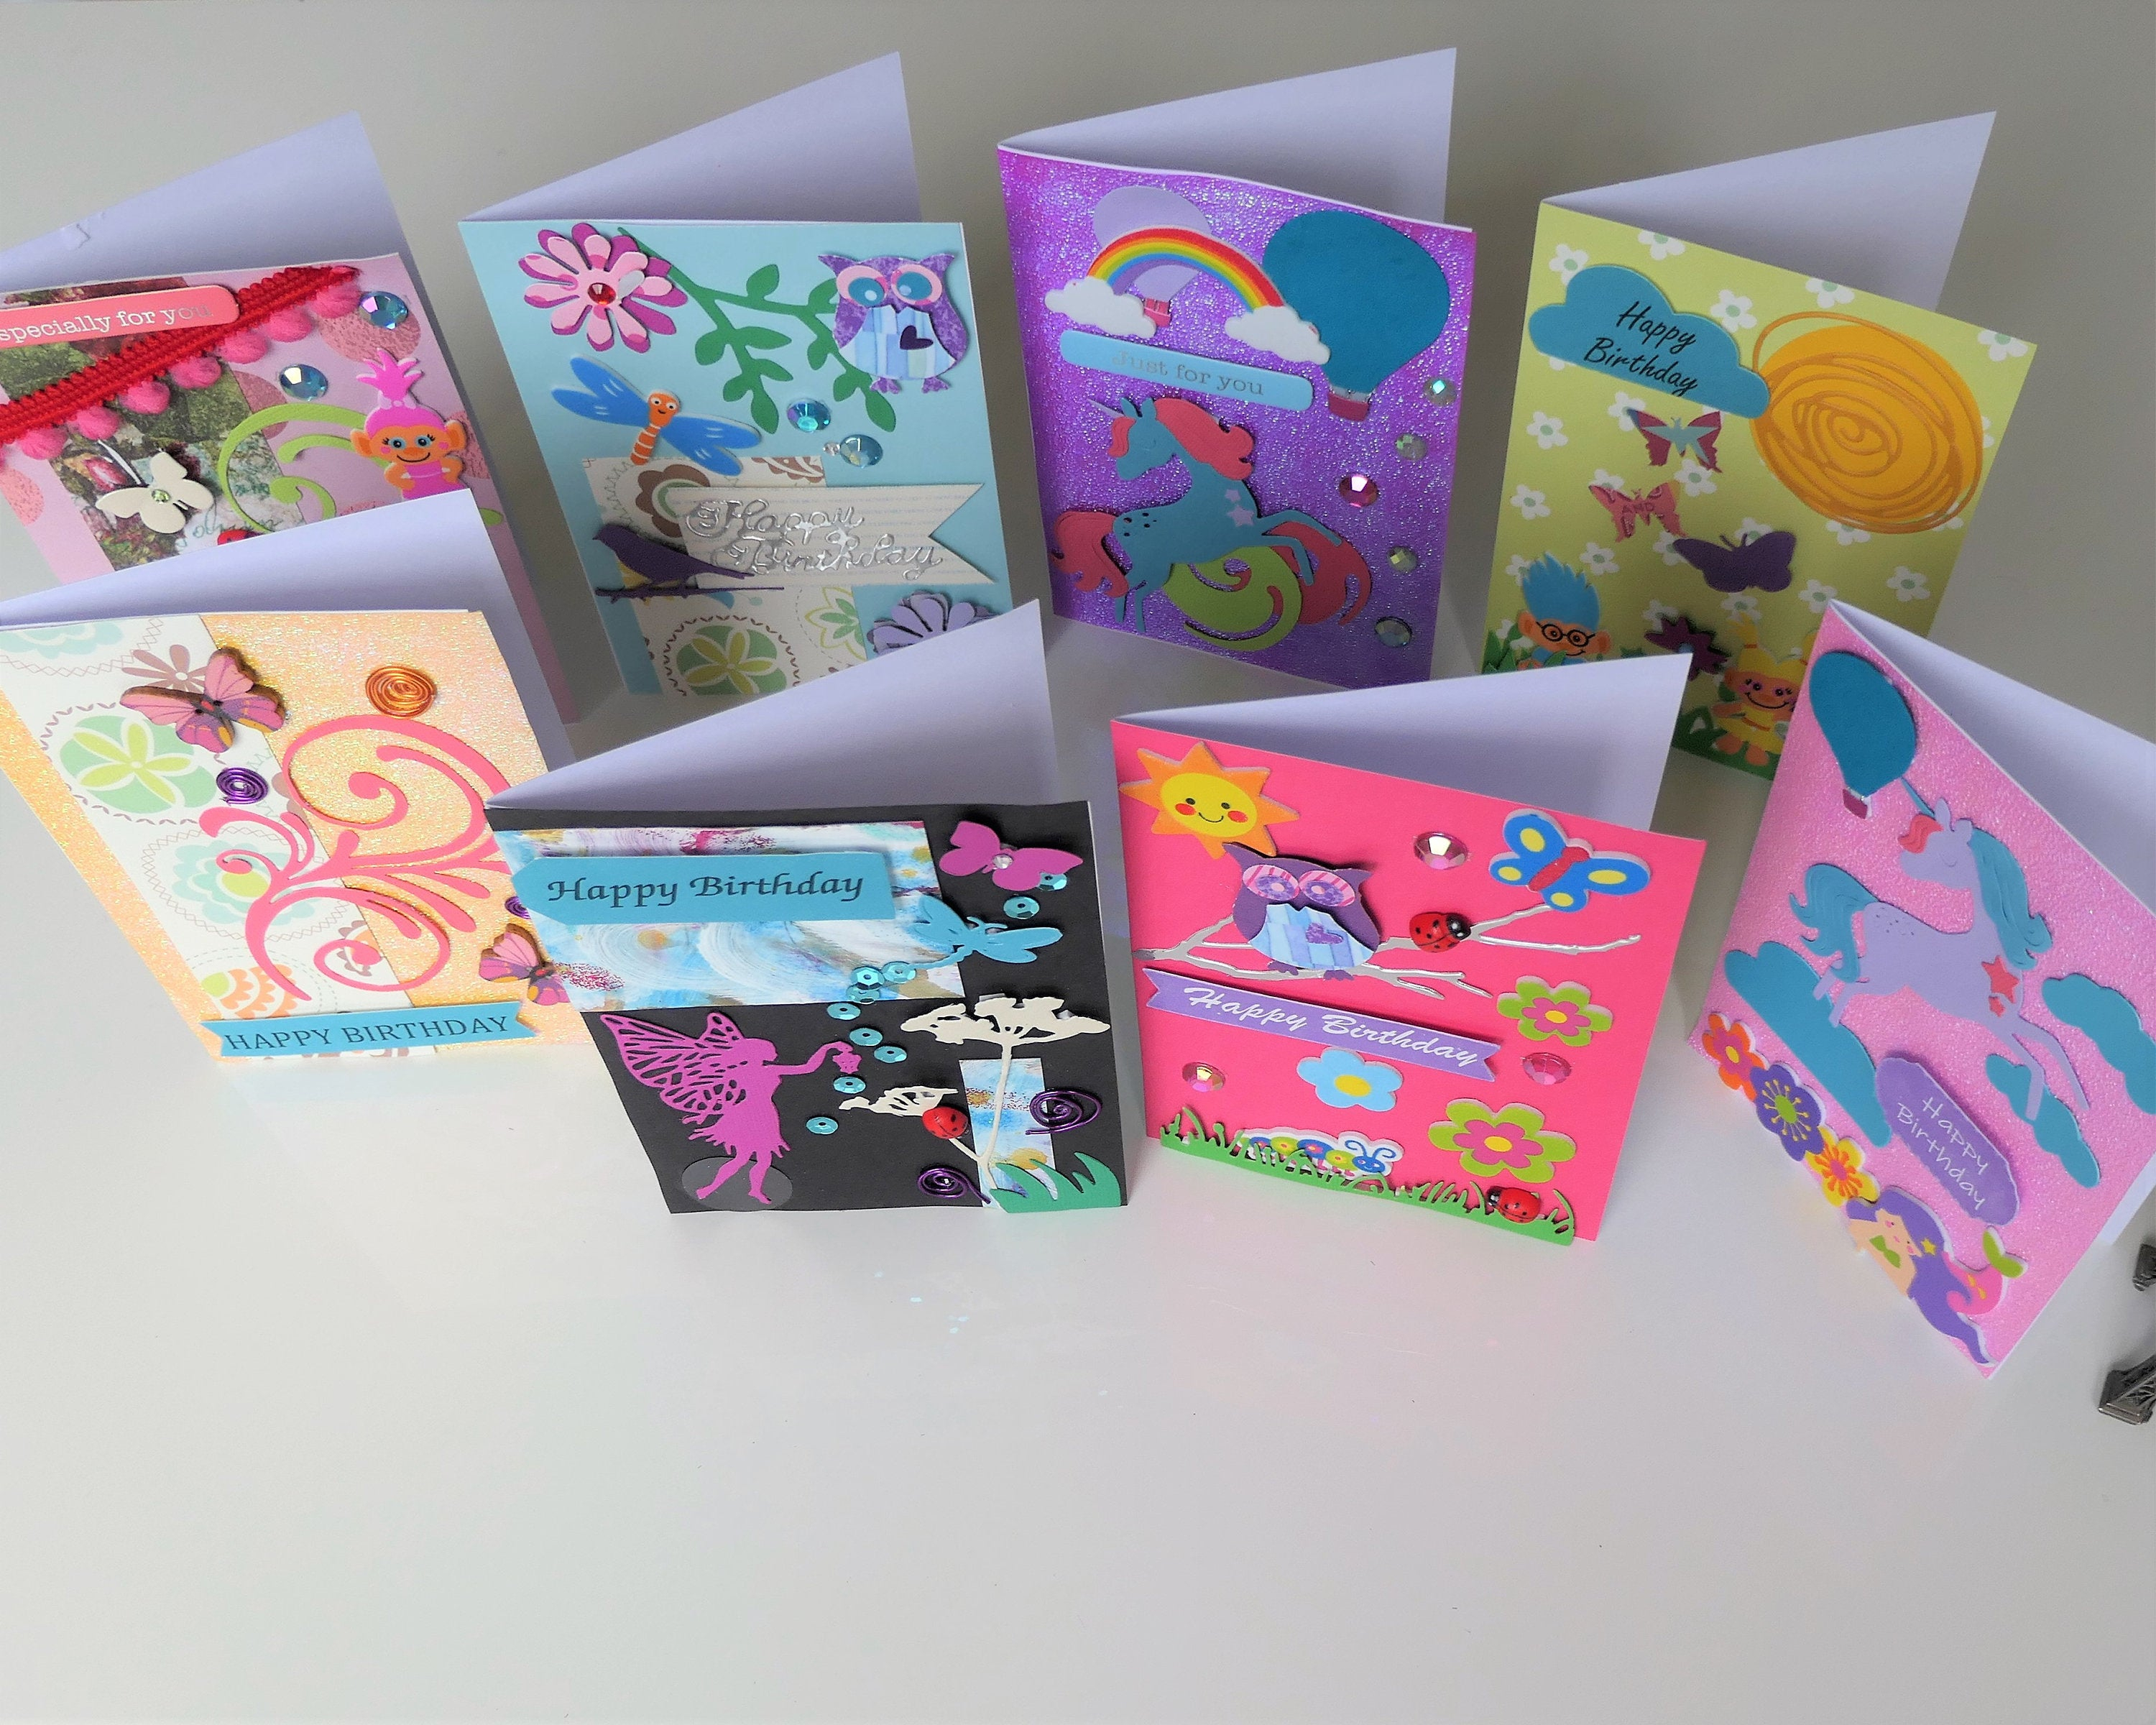 Birthday Card Making Ideas For Kids Kids Birthday Card Making Kit Gardens And Fantasy Creatures